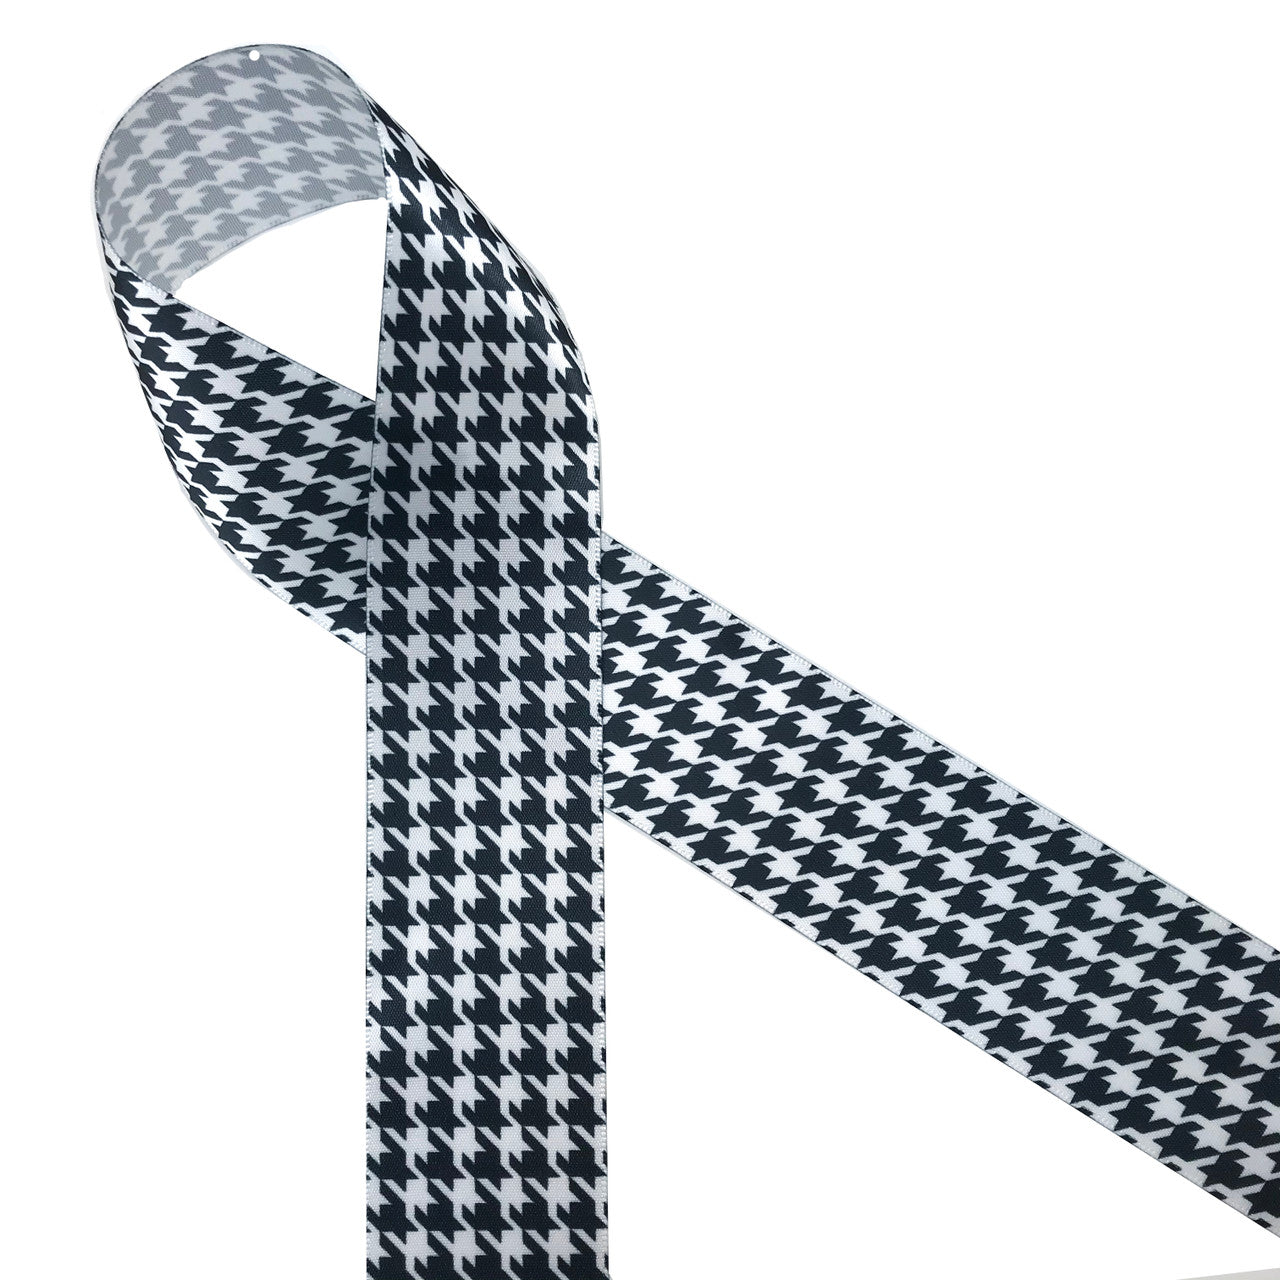 Black and white houndstooth check printed on 1.5" white single face satin ribbon is a classic design for Holiday gift wrap, Father's day and Alabama football. All our ribbons are designed and printed in the USA